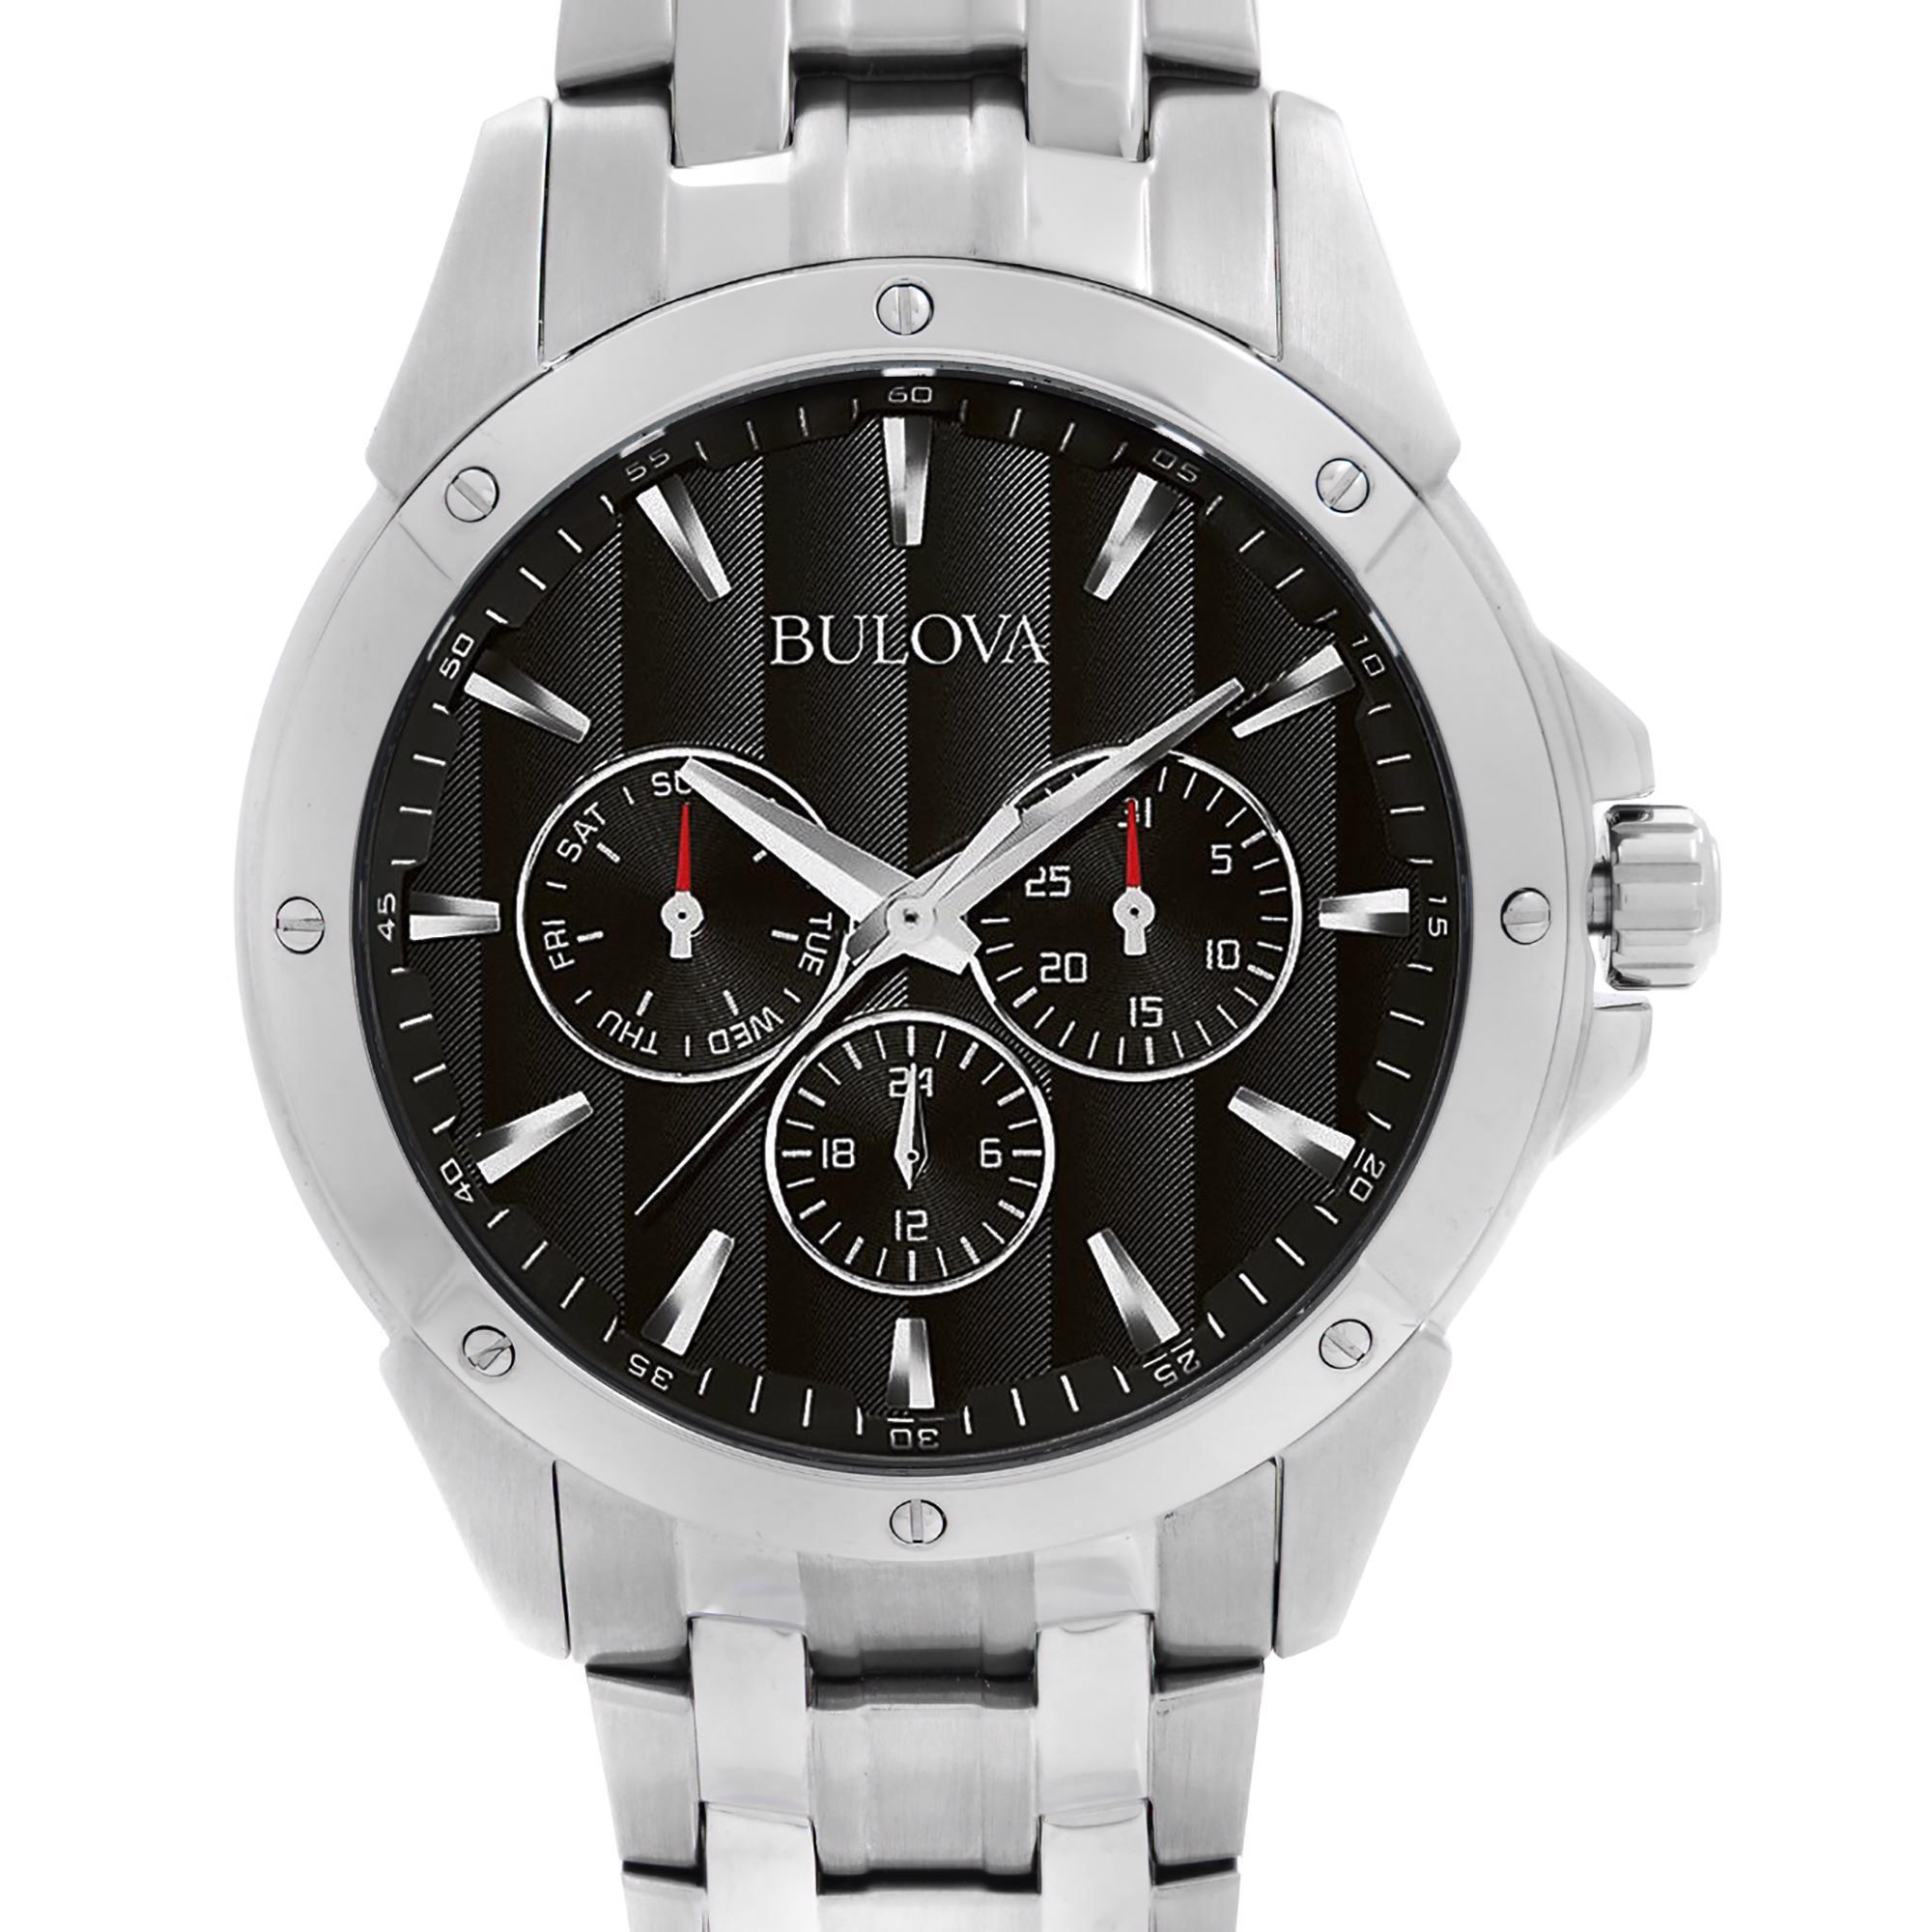 Unworn Bulova Classic 96C107. This Beautiful Timepiece Features: Stainless Steel Case & Bracelet. Black Dial with Silver-Tone Hands and Index Hour Markers. Minute Markers around the outer rim. Three Subdials - Date, Day and 24 Hour. This Watch is